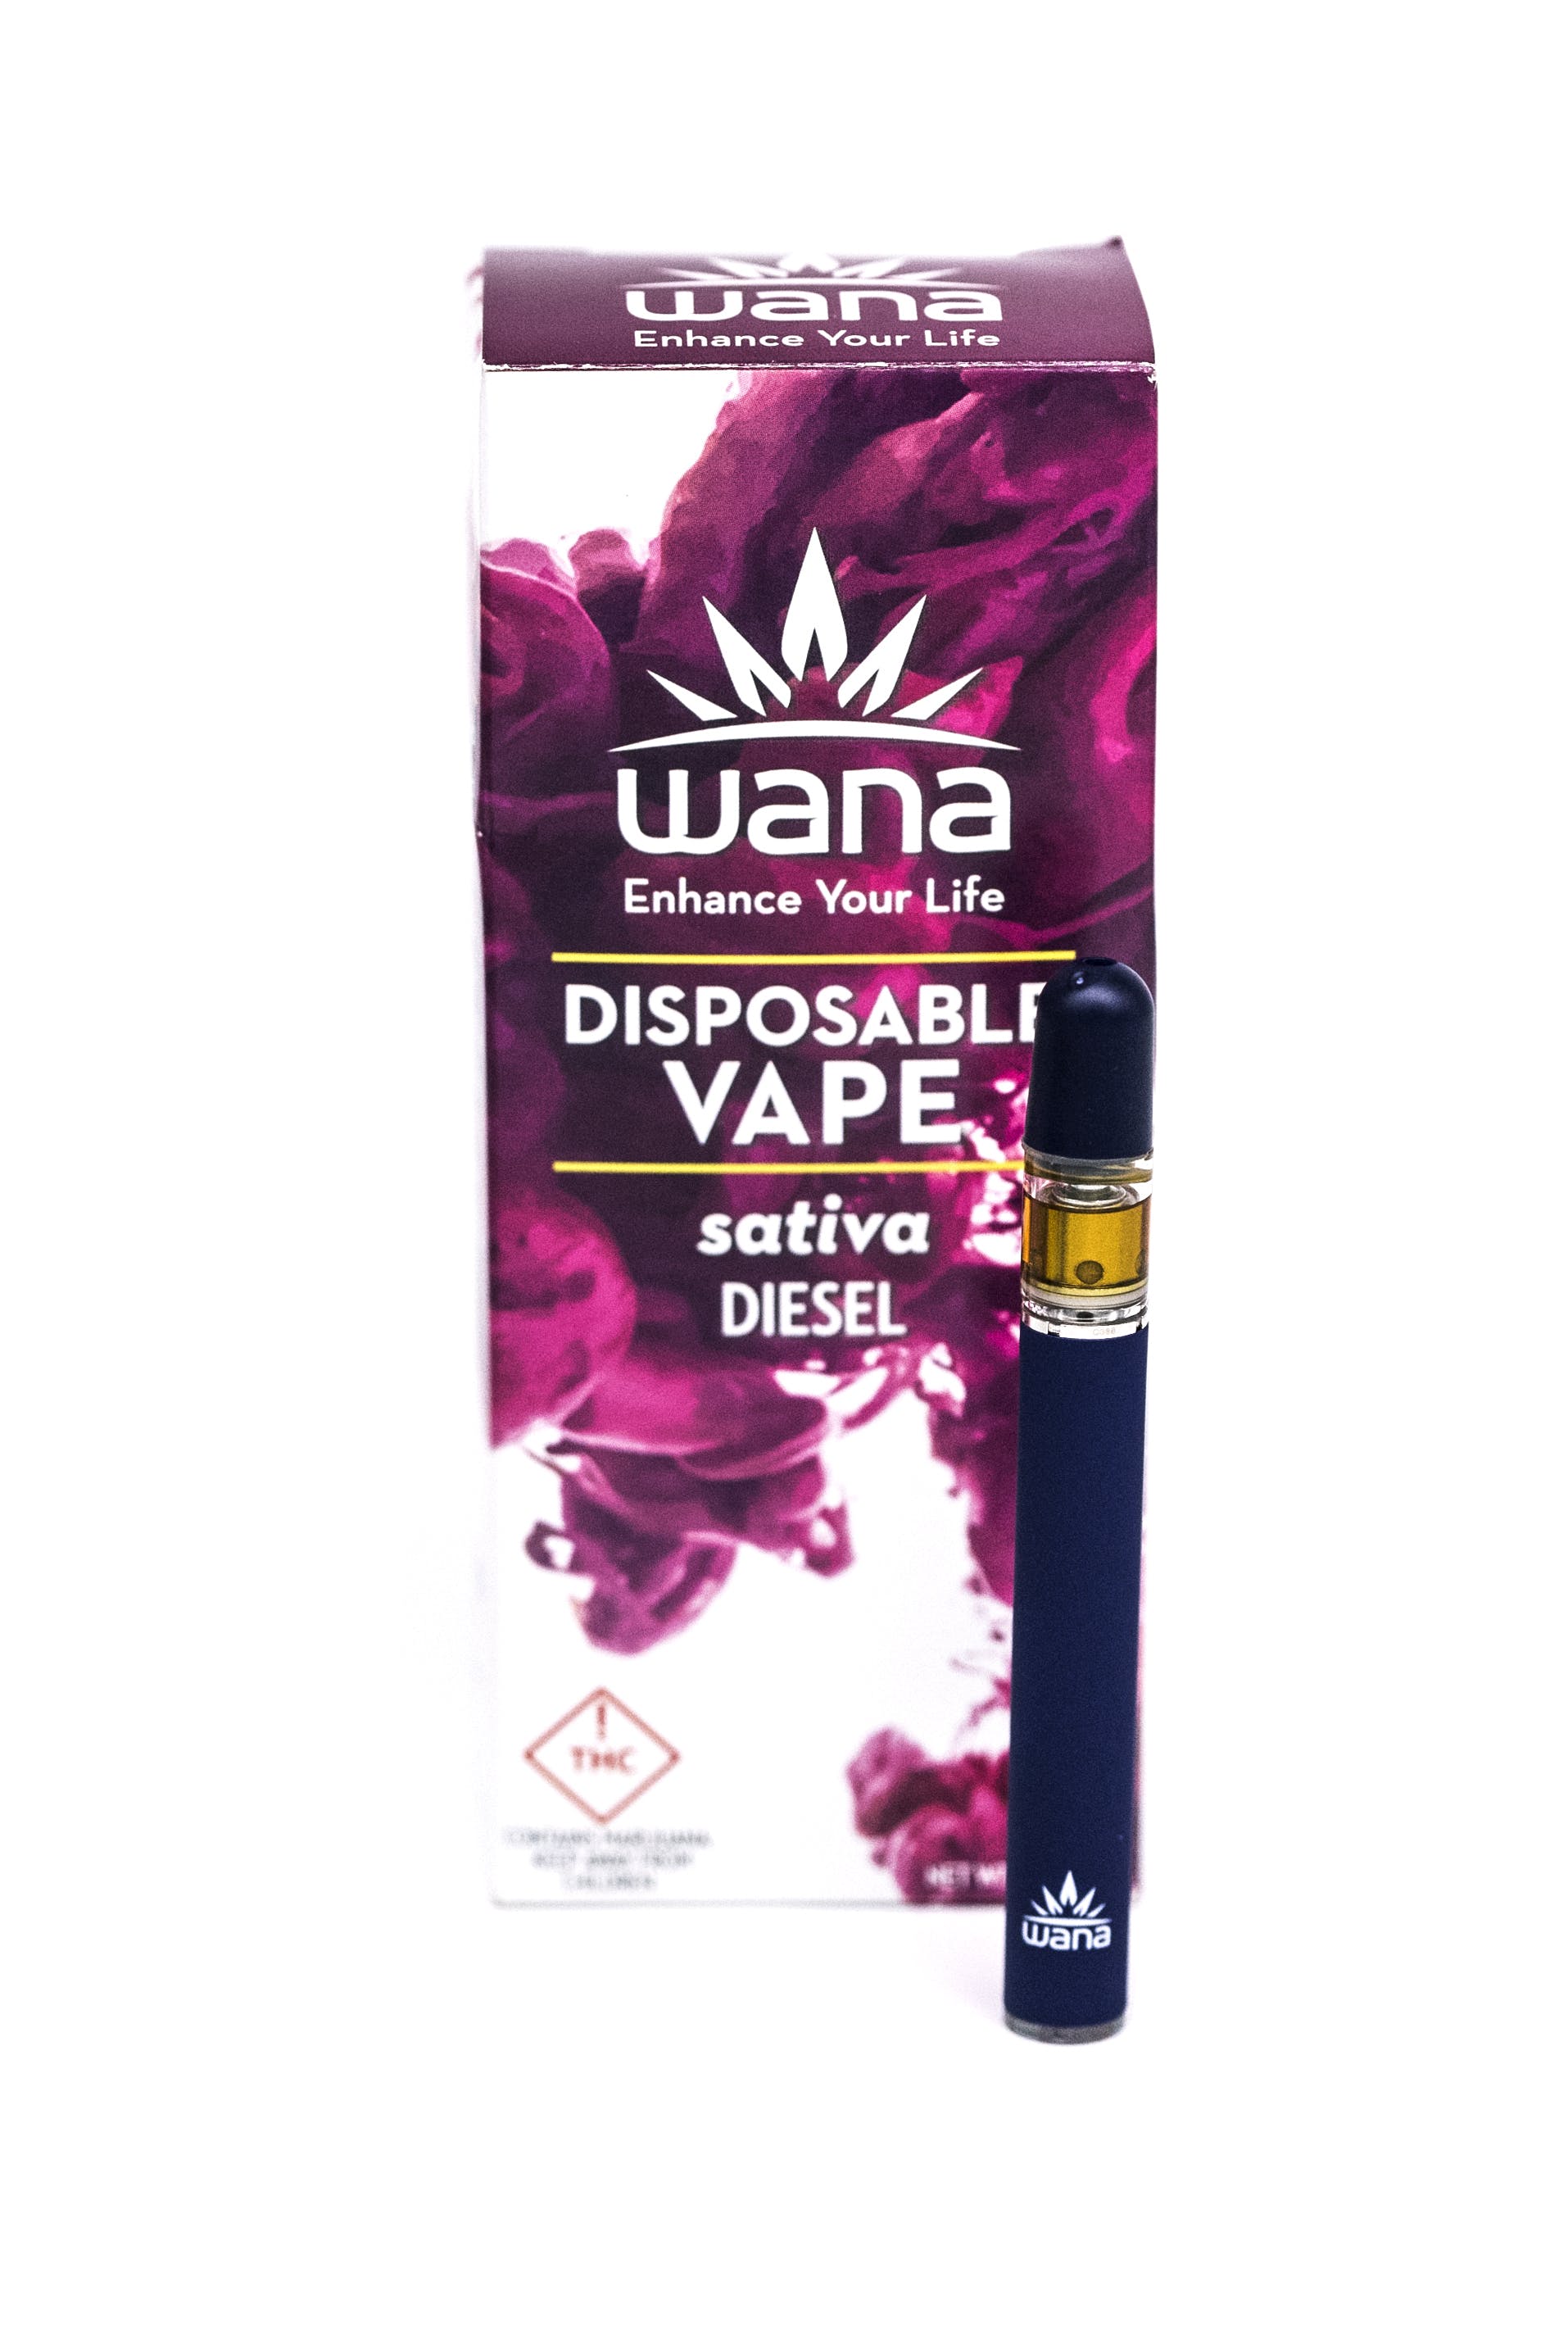 concentrate-wana-sativa-diesel-vape-300mg